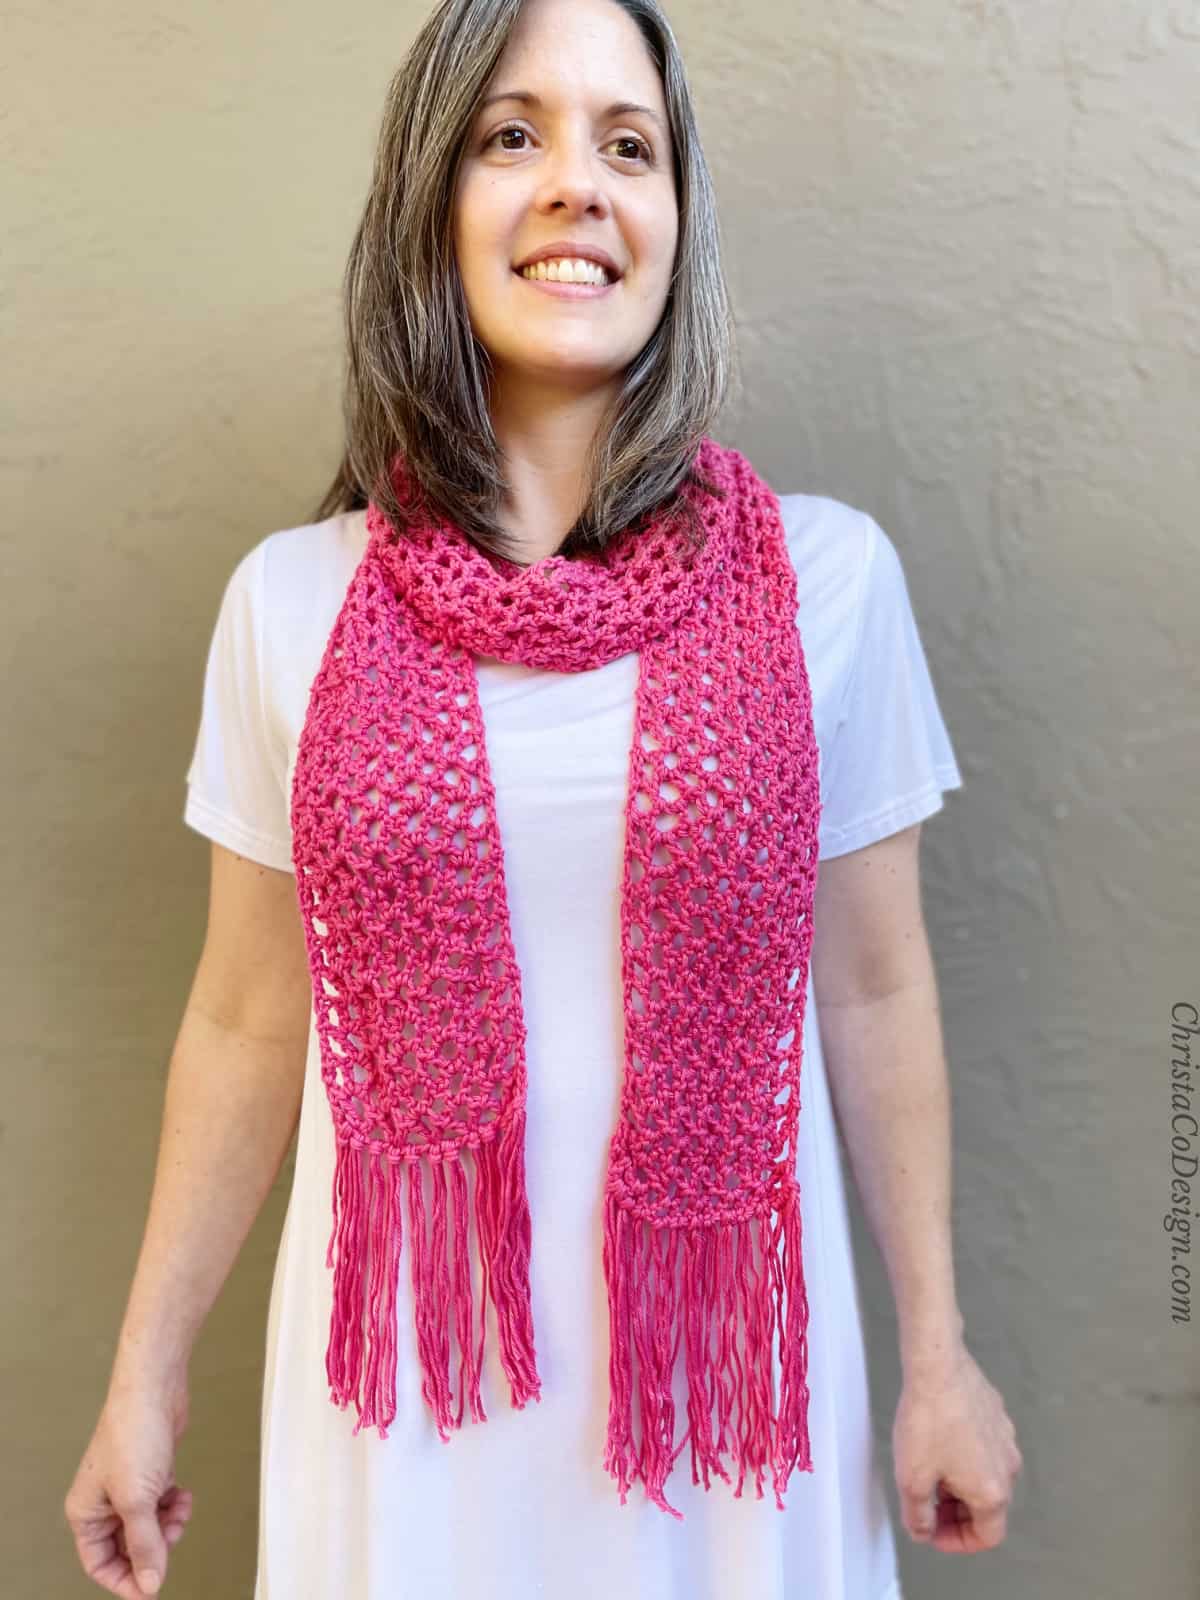 Merletto Scarf Crochet Pattern a Lacy Summer Scarf